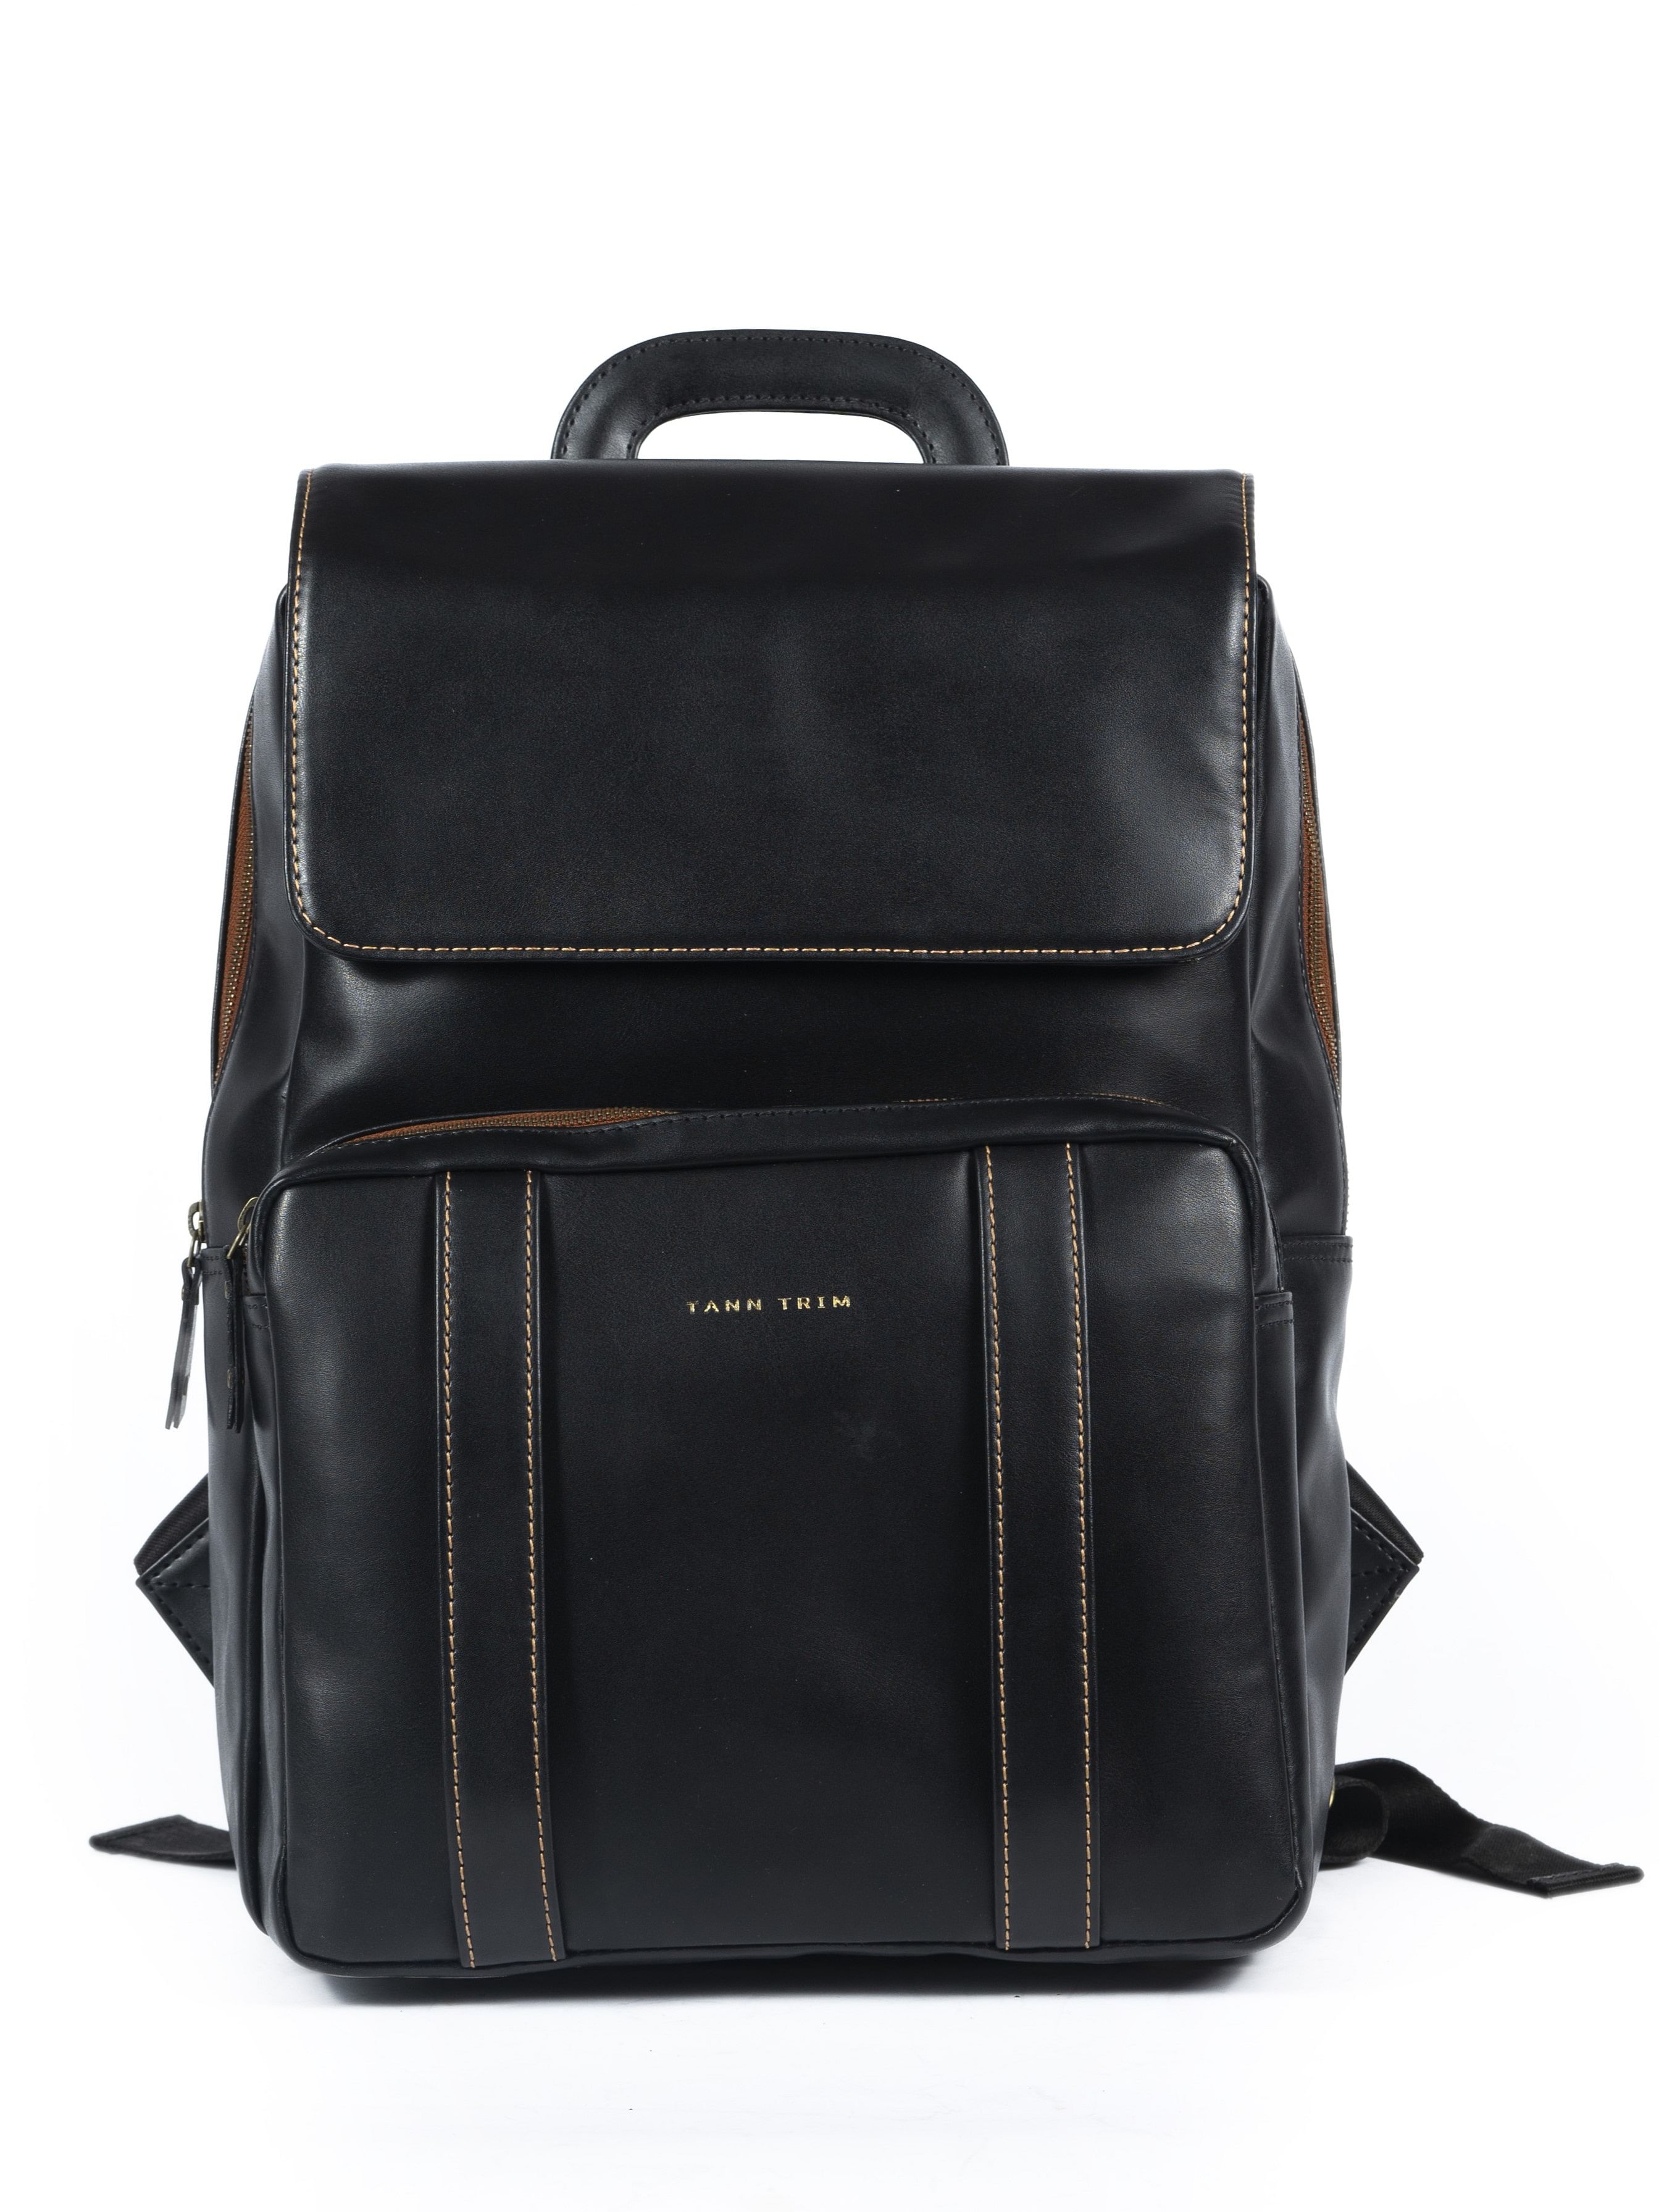 The Metro Movers Black Backpack